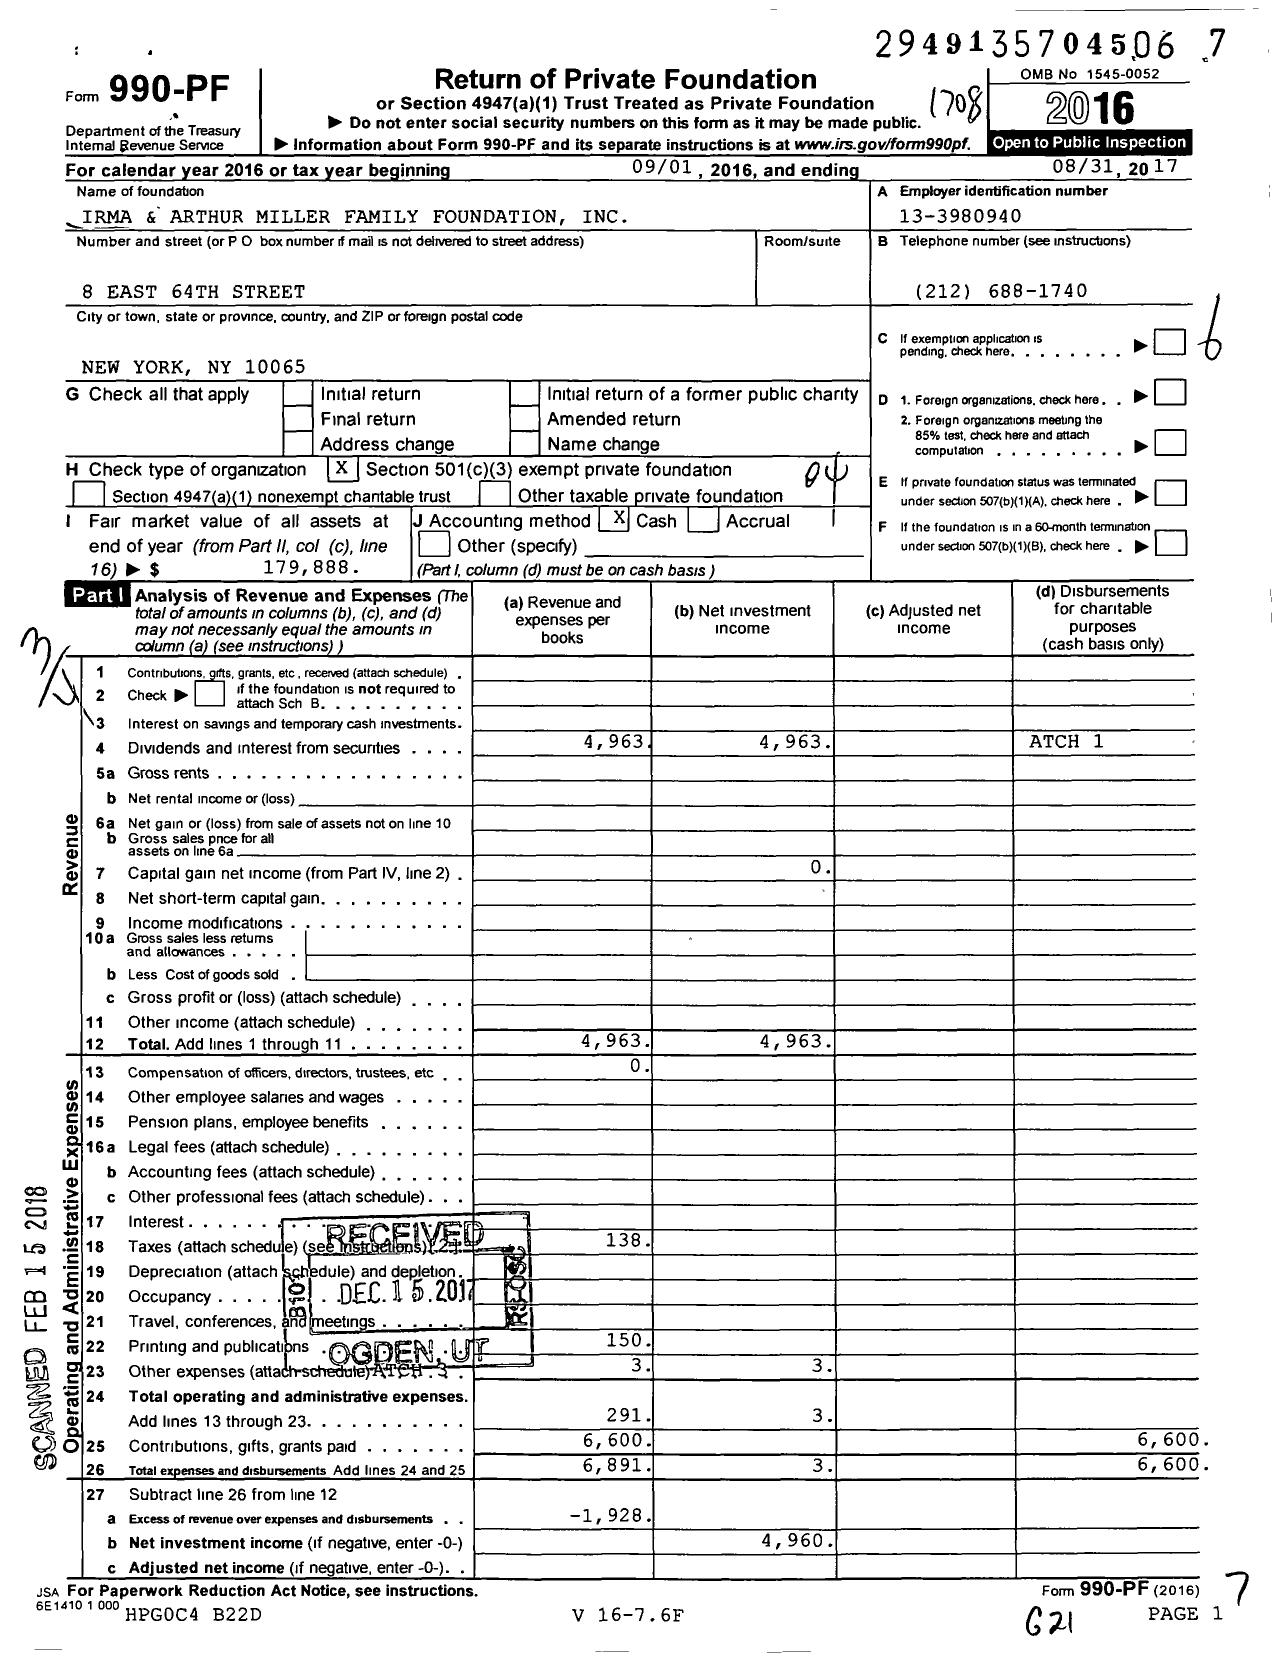 Image of first page of 2016 Form 990PF for Irma and Arthur Miller Family Foundation